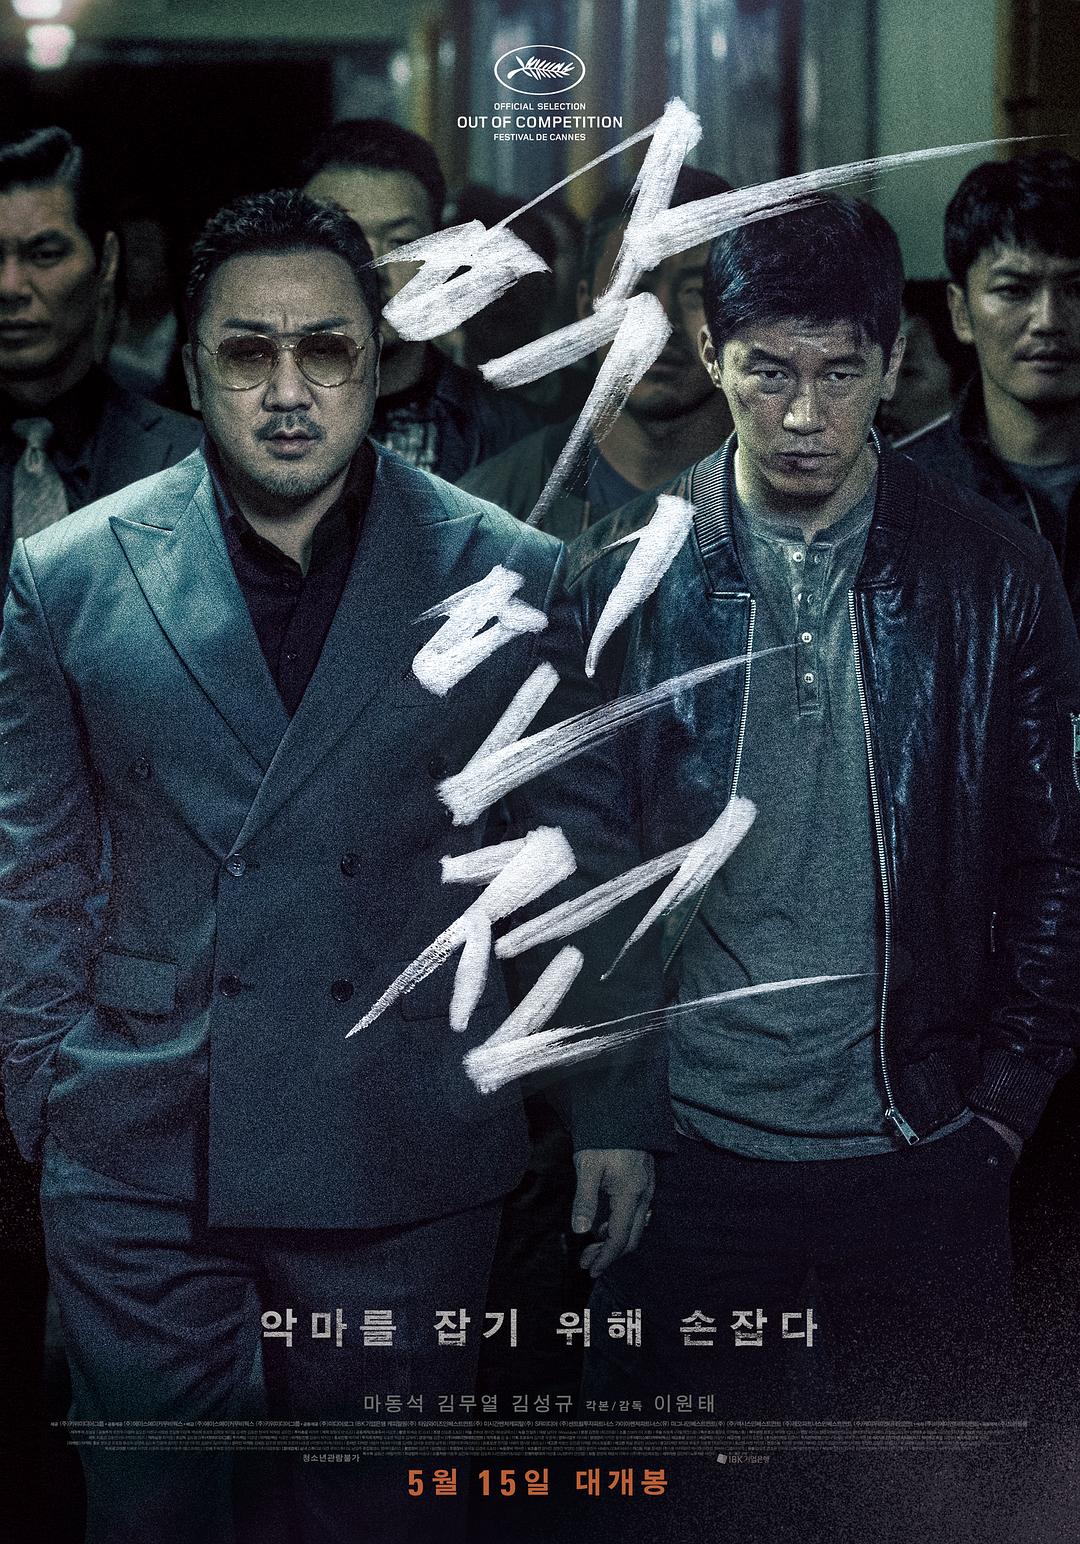 ˴ The.Gangster.the.Cop.the.Devil.2019.KOREAN.1080p.BluRay.x264.DTS-PbK 10.37GB-1.png